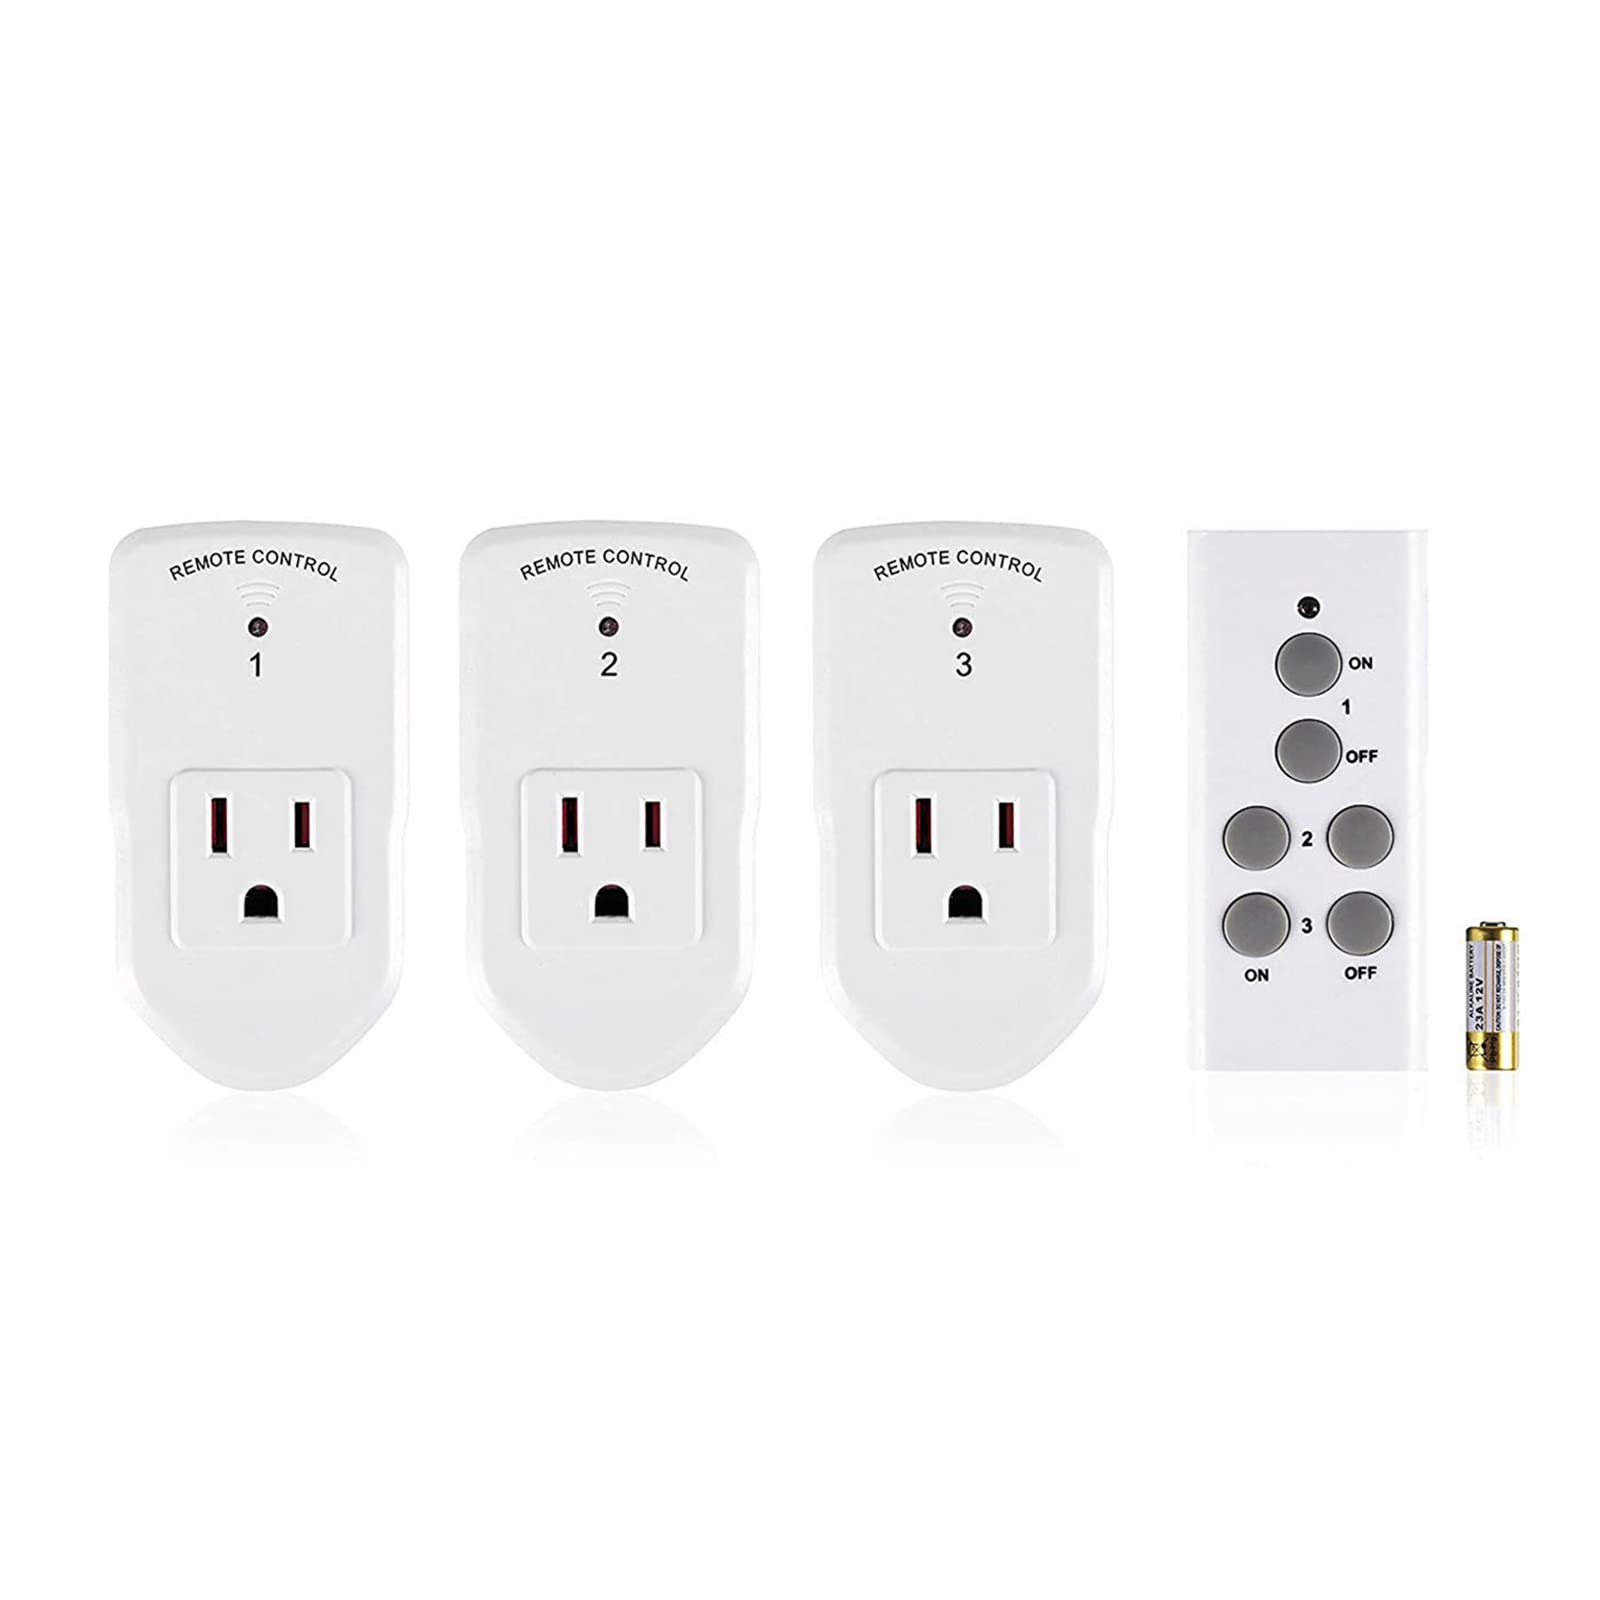 Wireless Remote Control Plugs, 40m/130ft Range for Lights, Appliances,  10A/1200W, 3 Surnice Outlets + 1 Remote